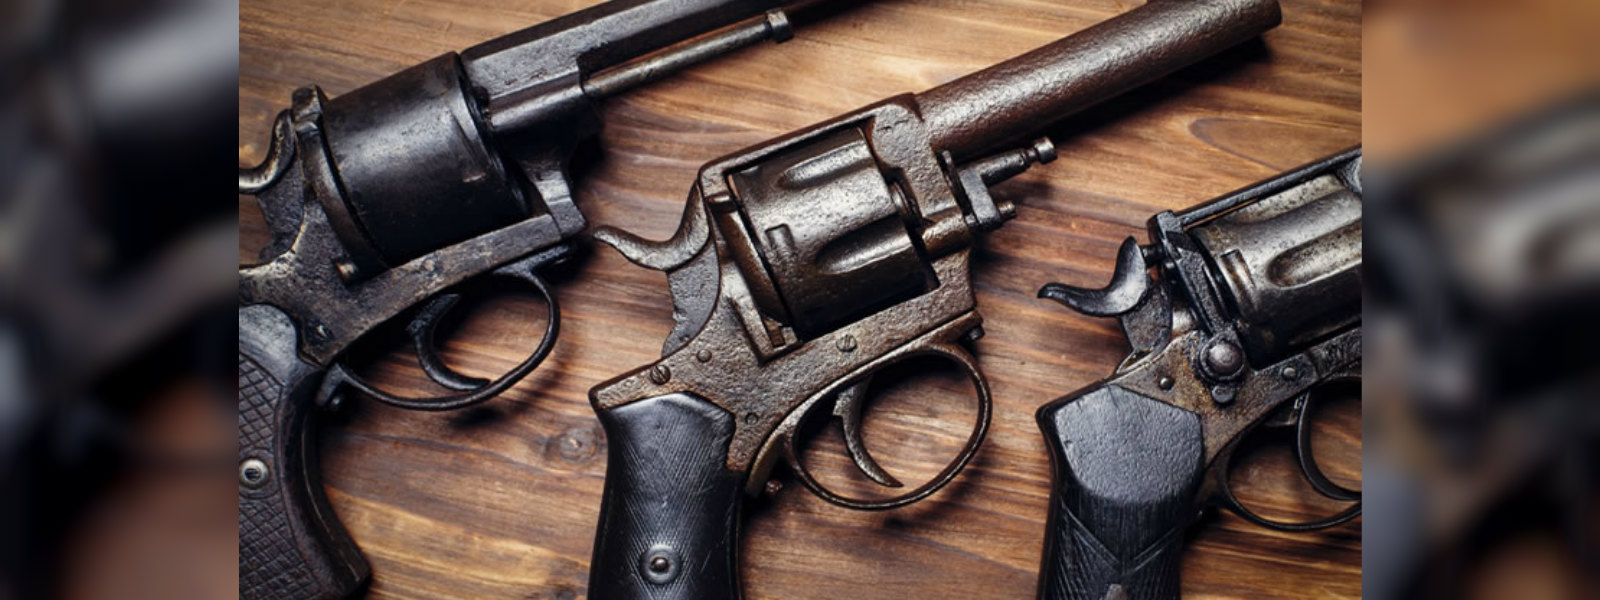 Two arrested with firearms in Agalawatta 